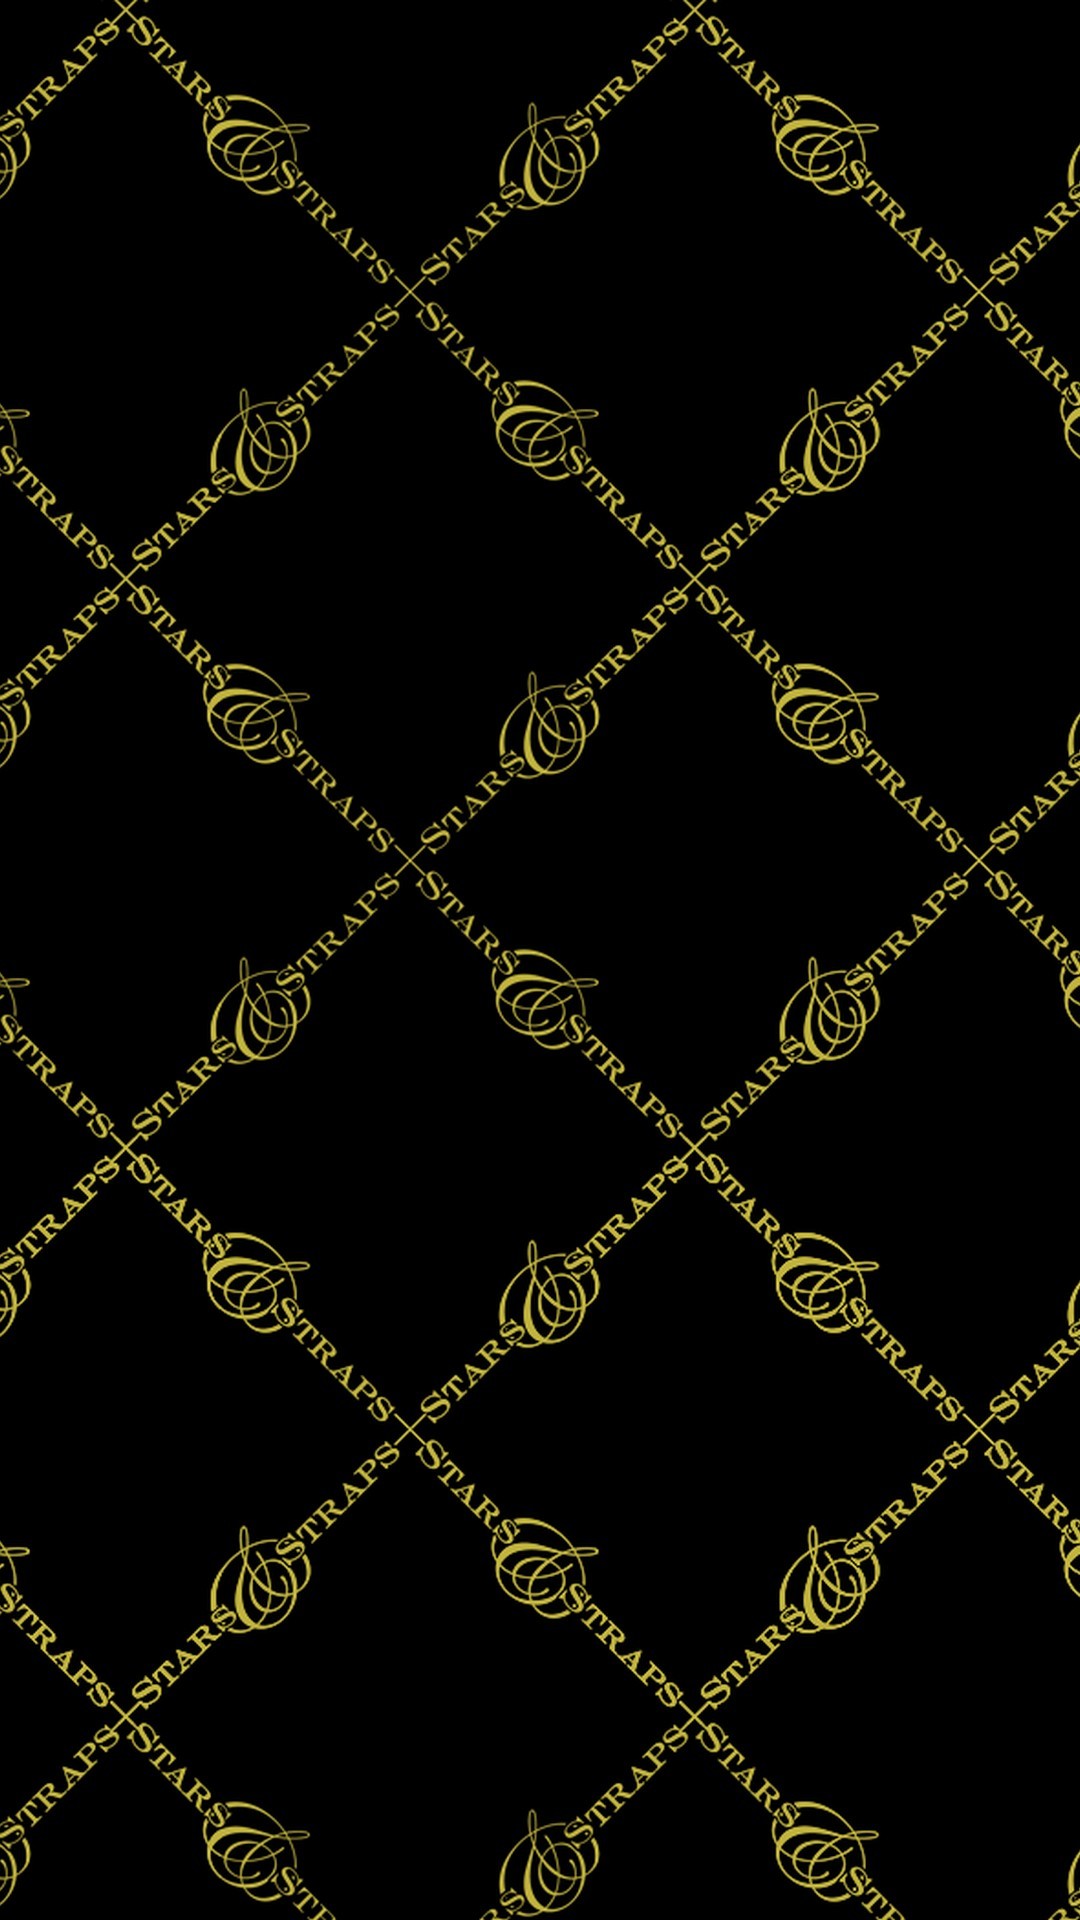 1080x1920 iPhone 8 Wallpaper Black and Gold resolution 